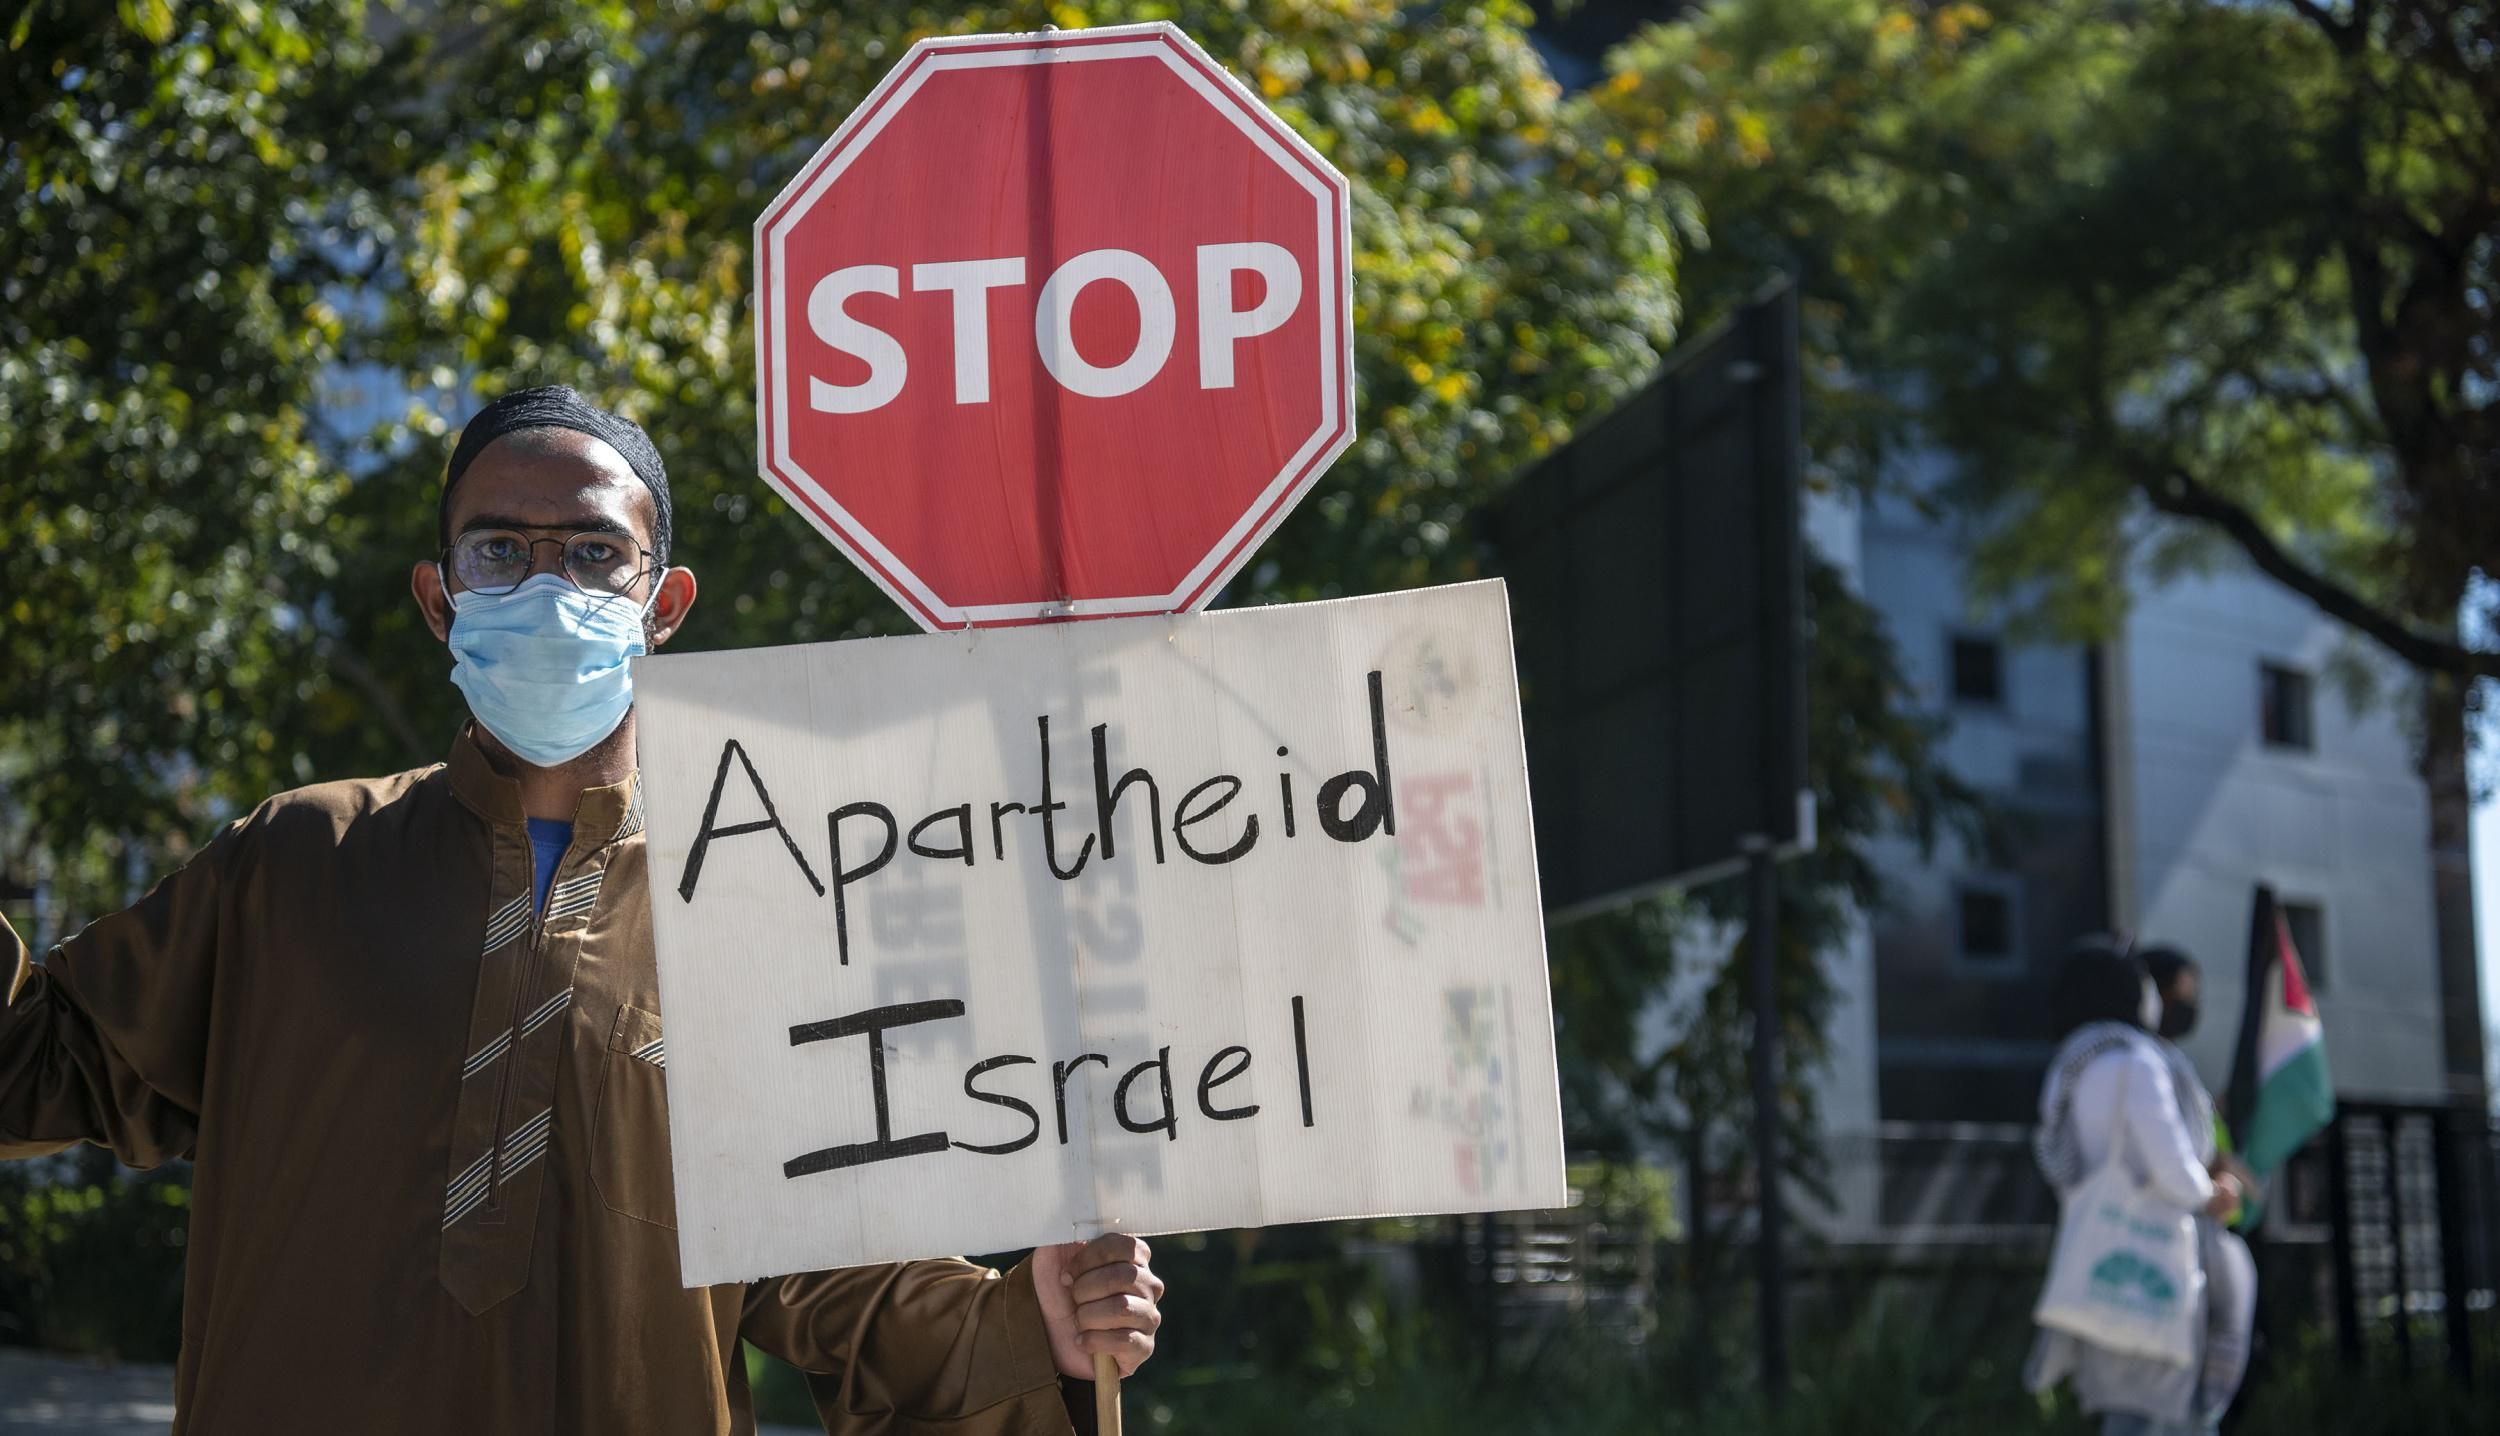 A group of South Africans hold banners during a demonstration to protest Israeli attacks on Palestinians at Masjid al-Aqsa in Jerusalem and Gaza Strip, on May 11, 2021, in Sandton district of Johannesburg, South Africa. (Photo: Ihsaan Haffejee/Anadolu Agency via Getty Images)